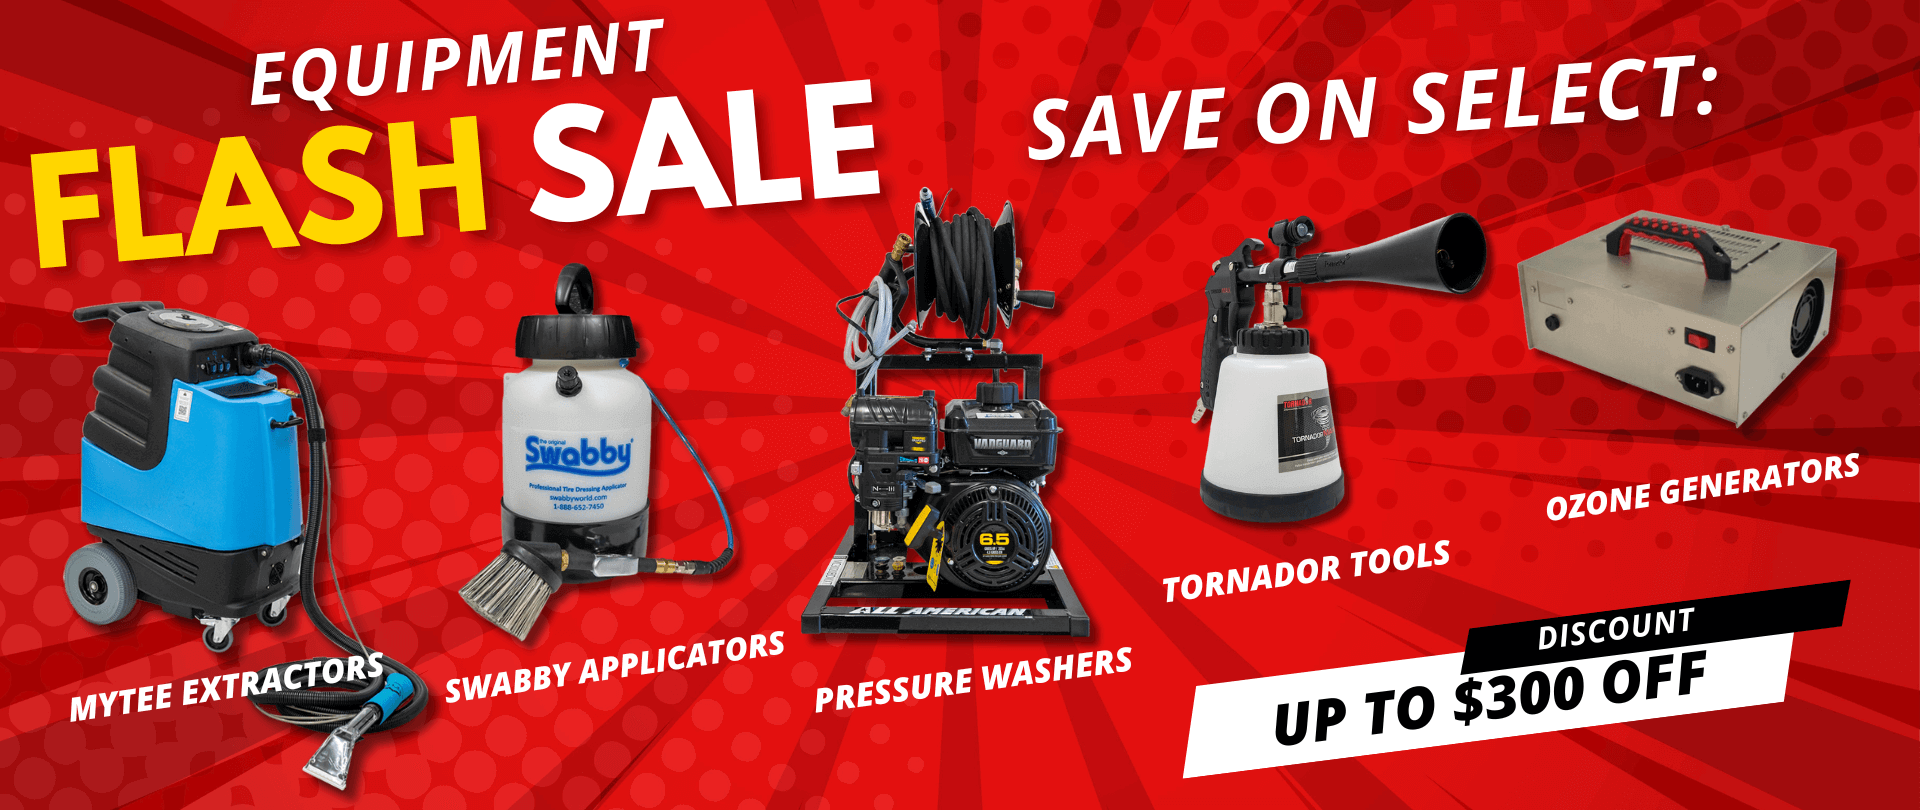 Detail King Equipment Flash Sale Save Up To $300